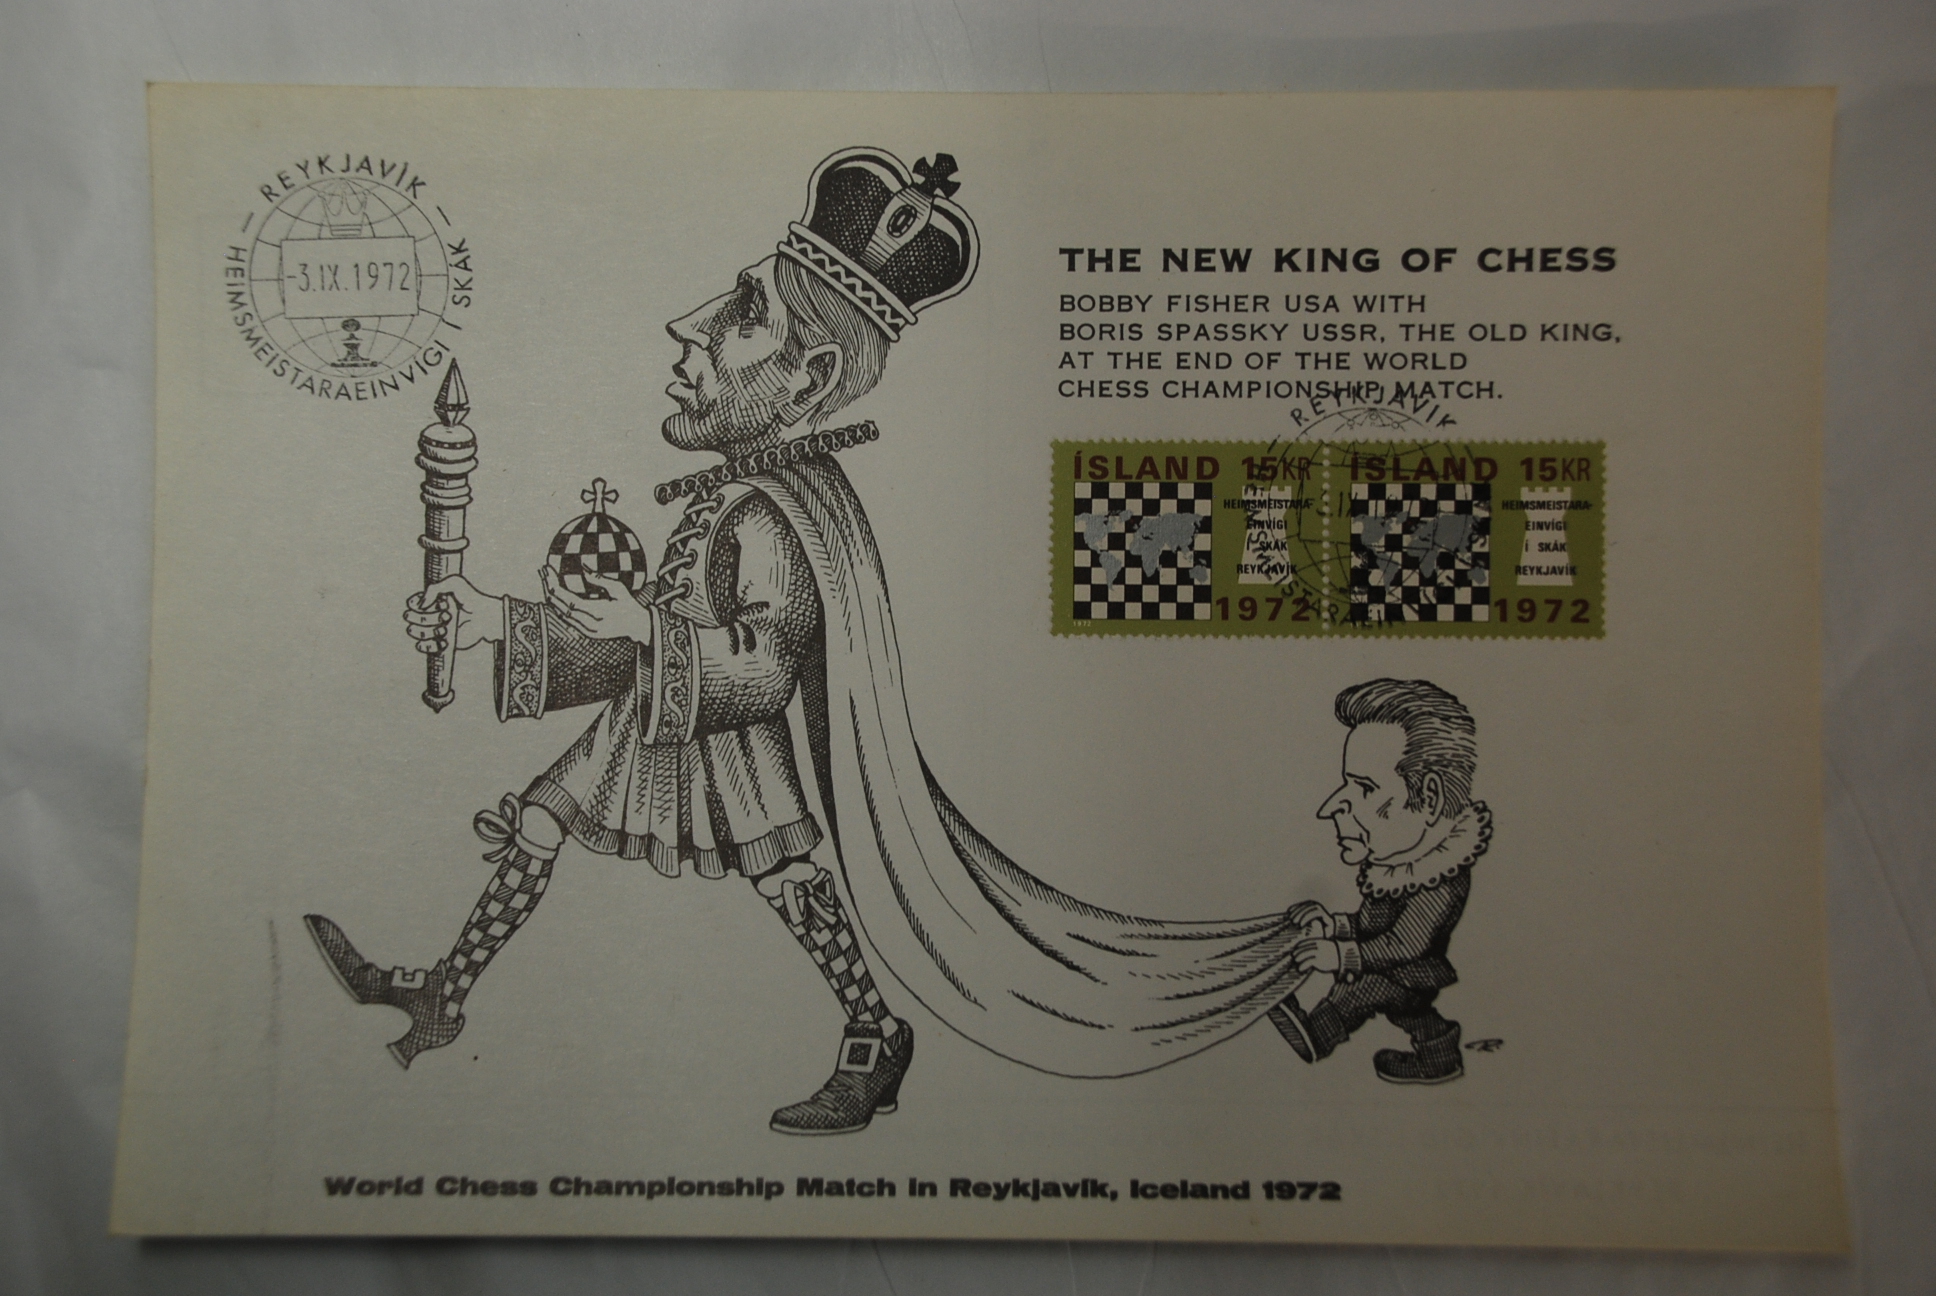 Chess 1972-Spacsky-fischer World chess championship Iceland-Official first day covers(2) and - Image 2 of 4